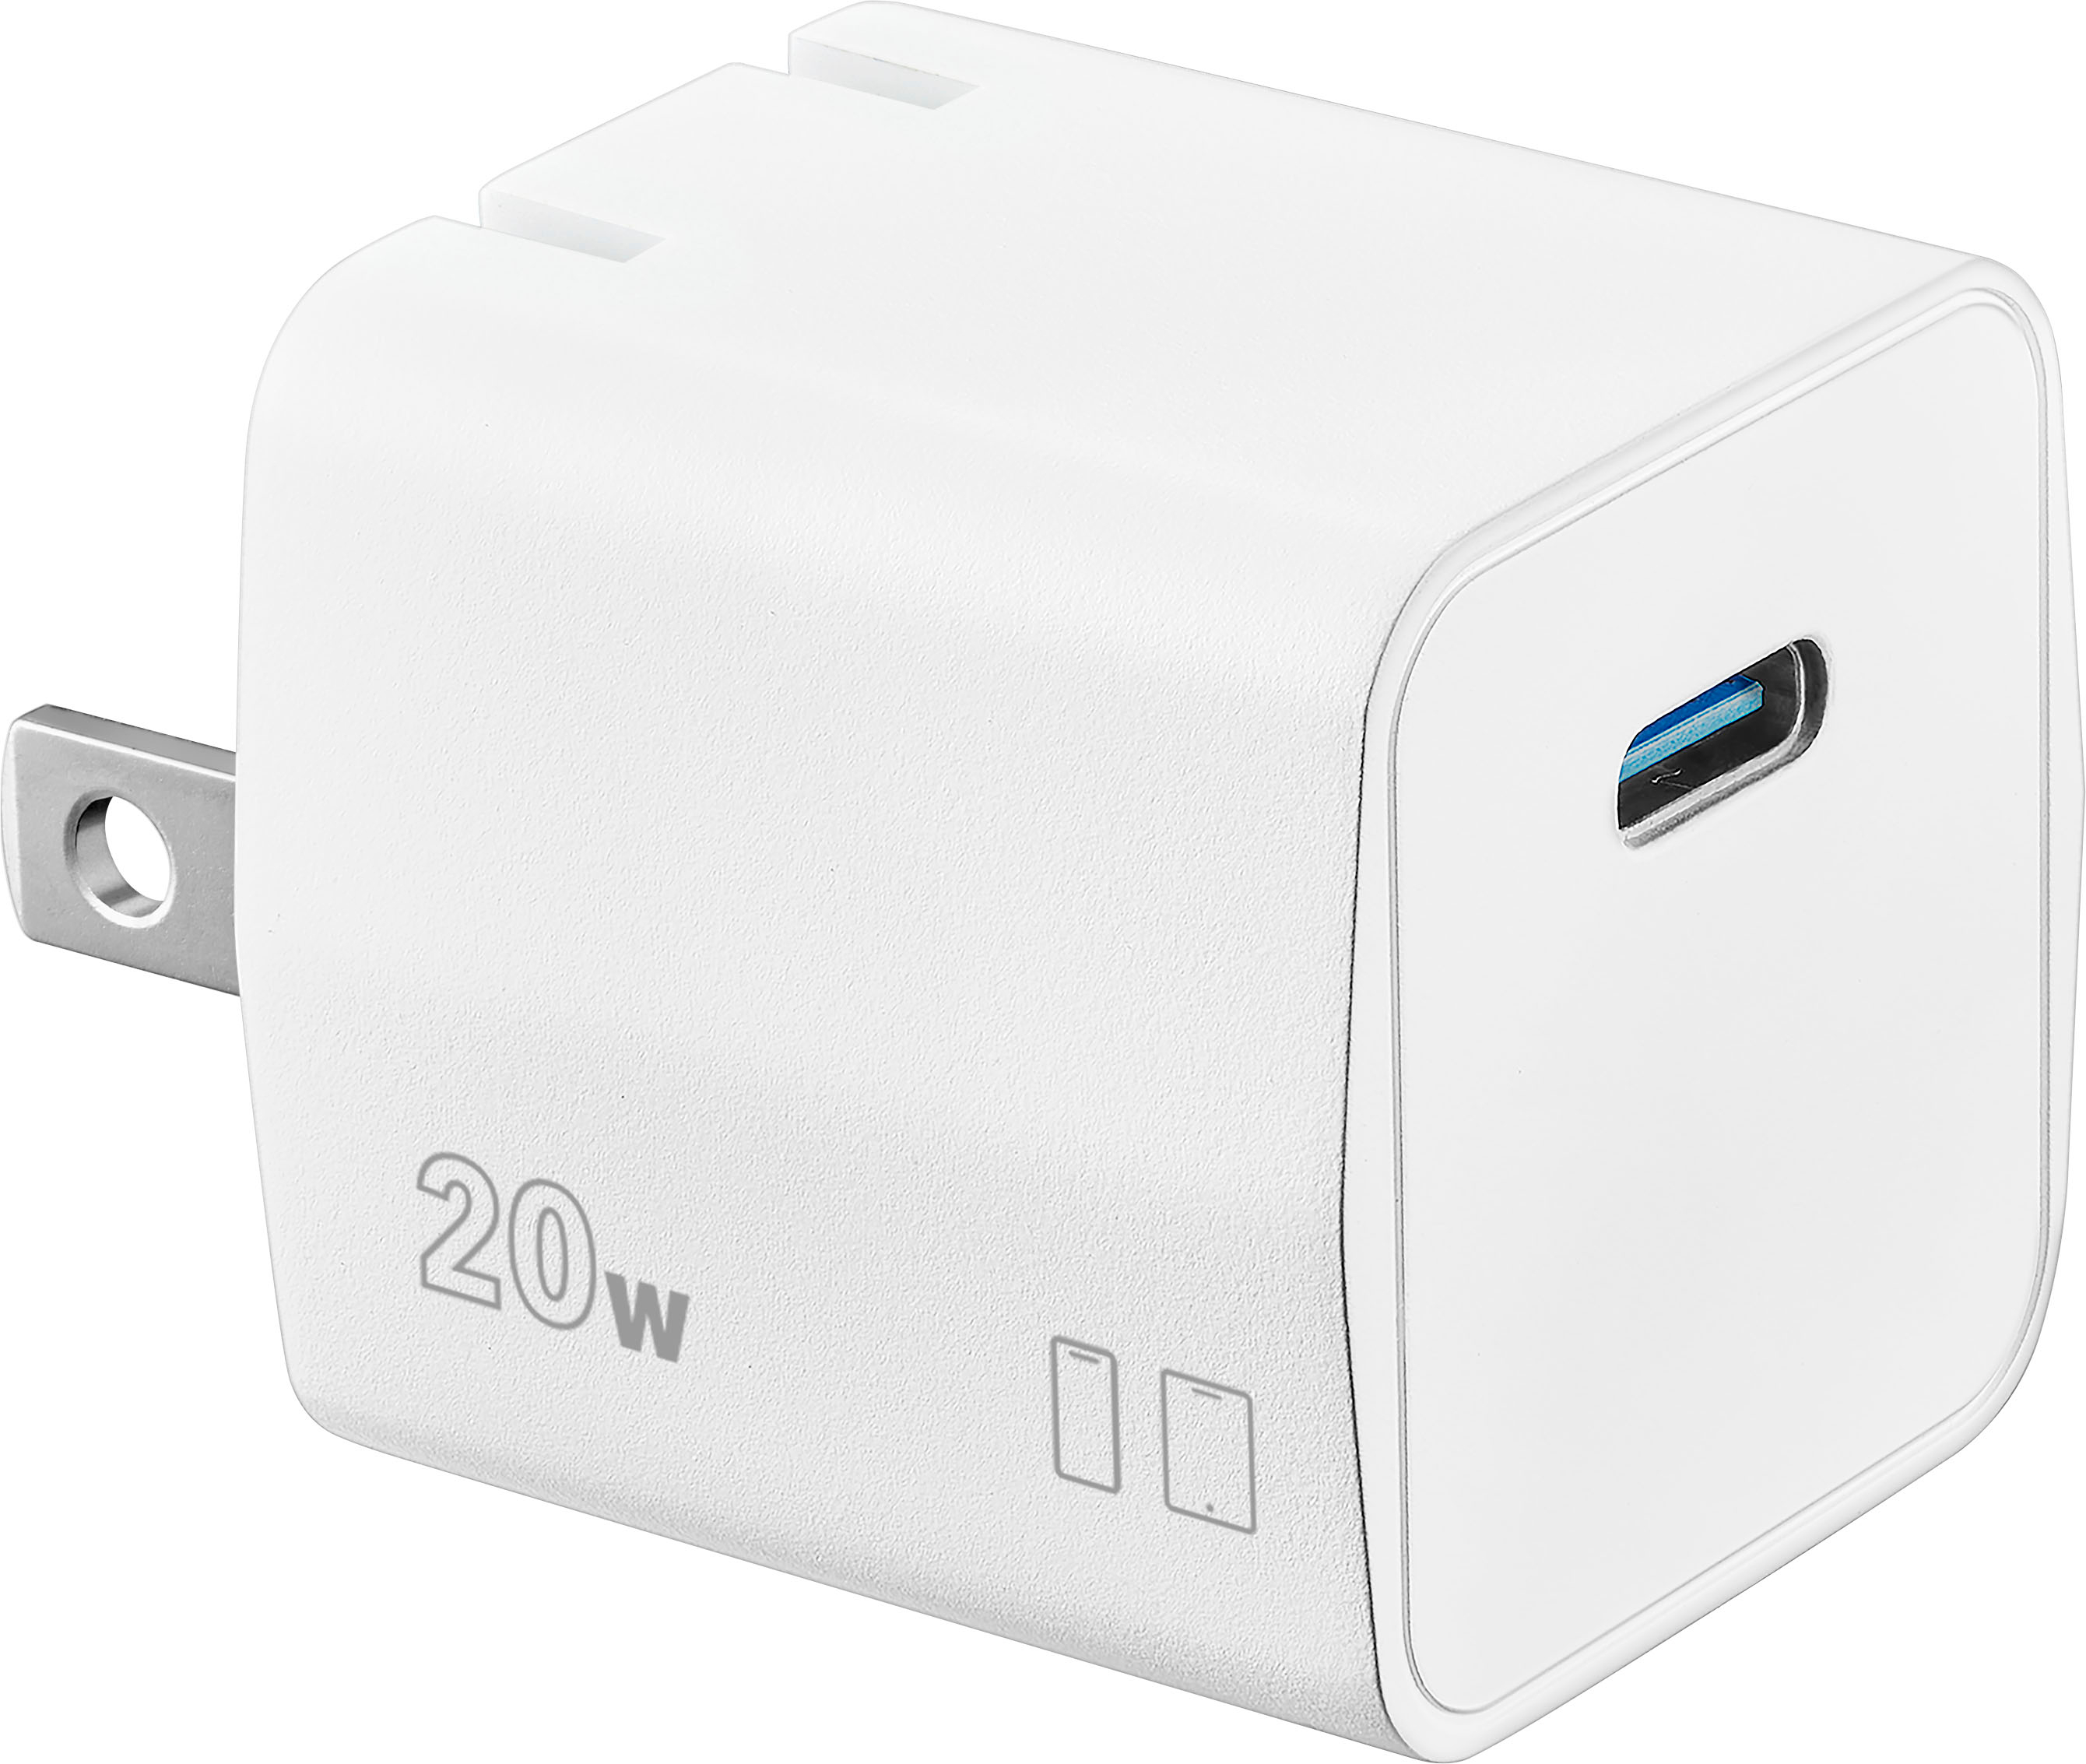 ipad 2 charger - Best Buy